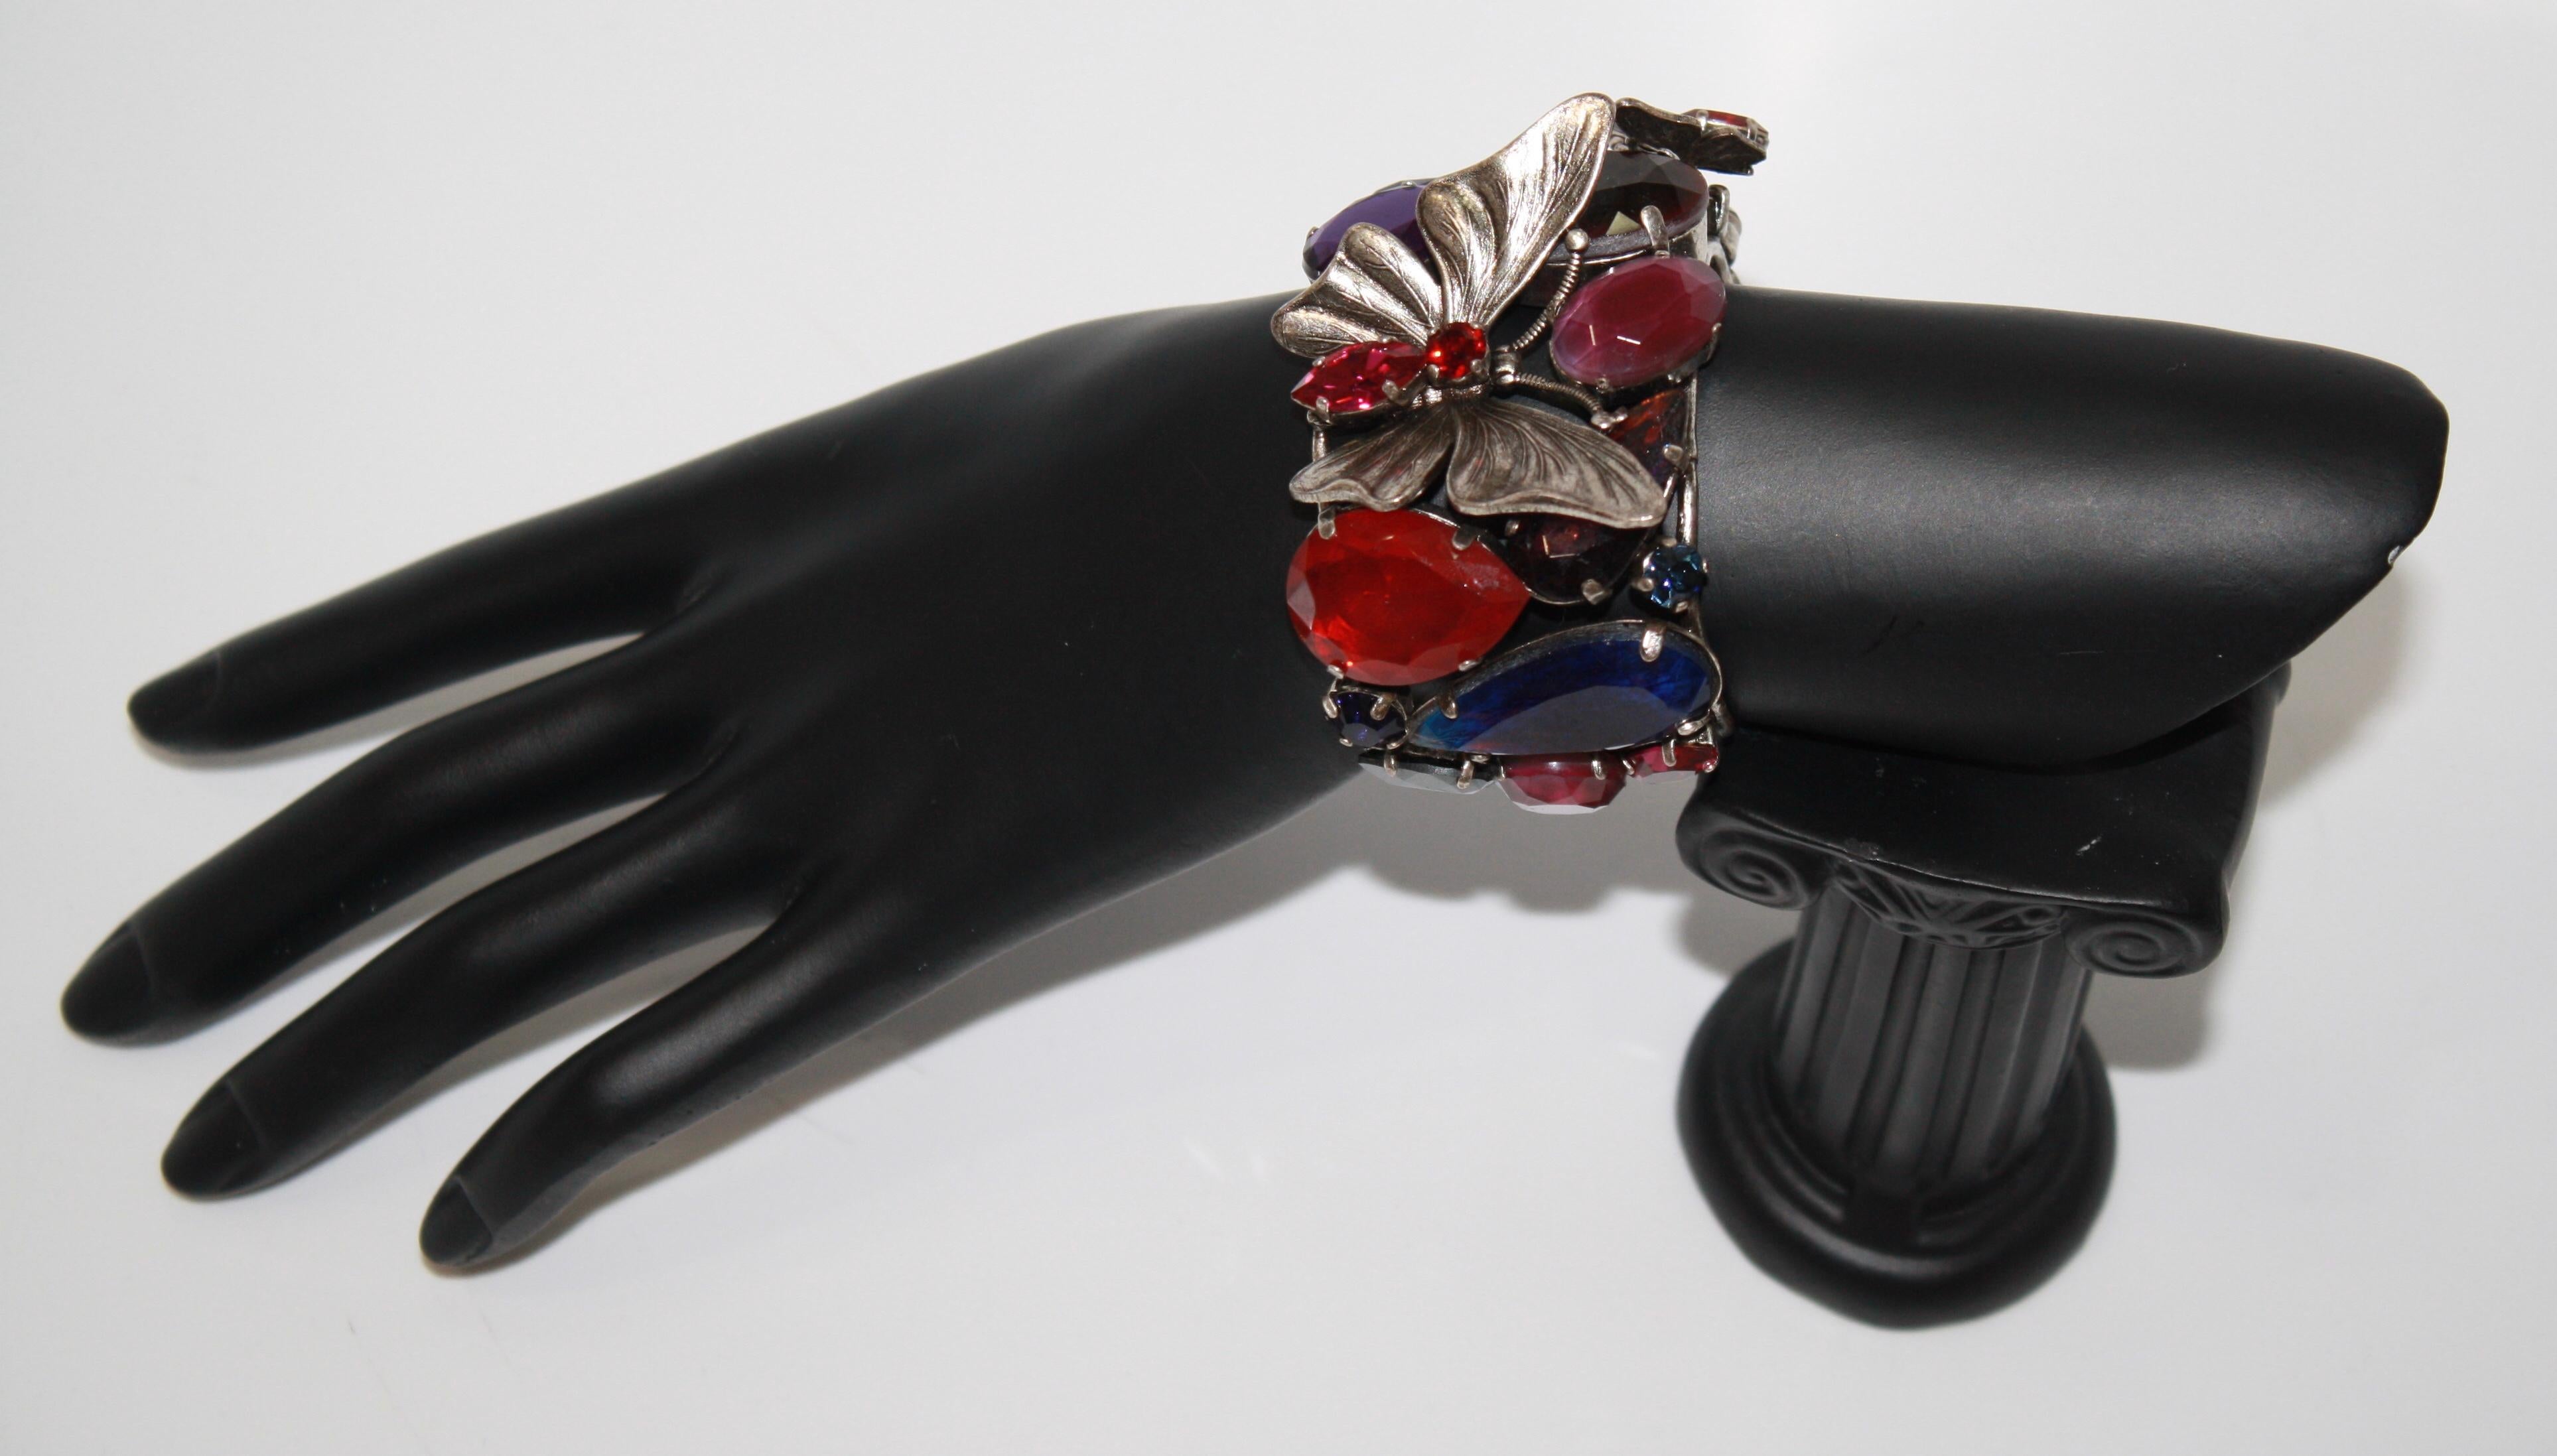 Dark rhodium metal with Swarovski crystal. Metal is soft and cuff can be adjusted to the wrist.